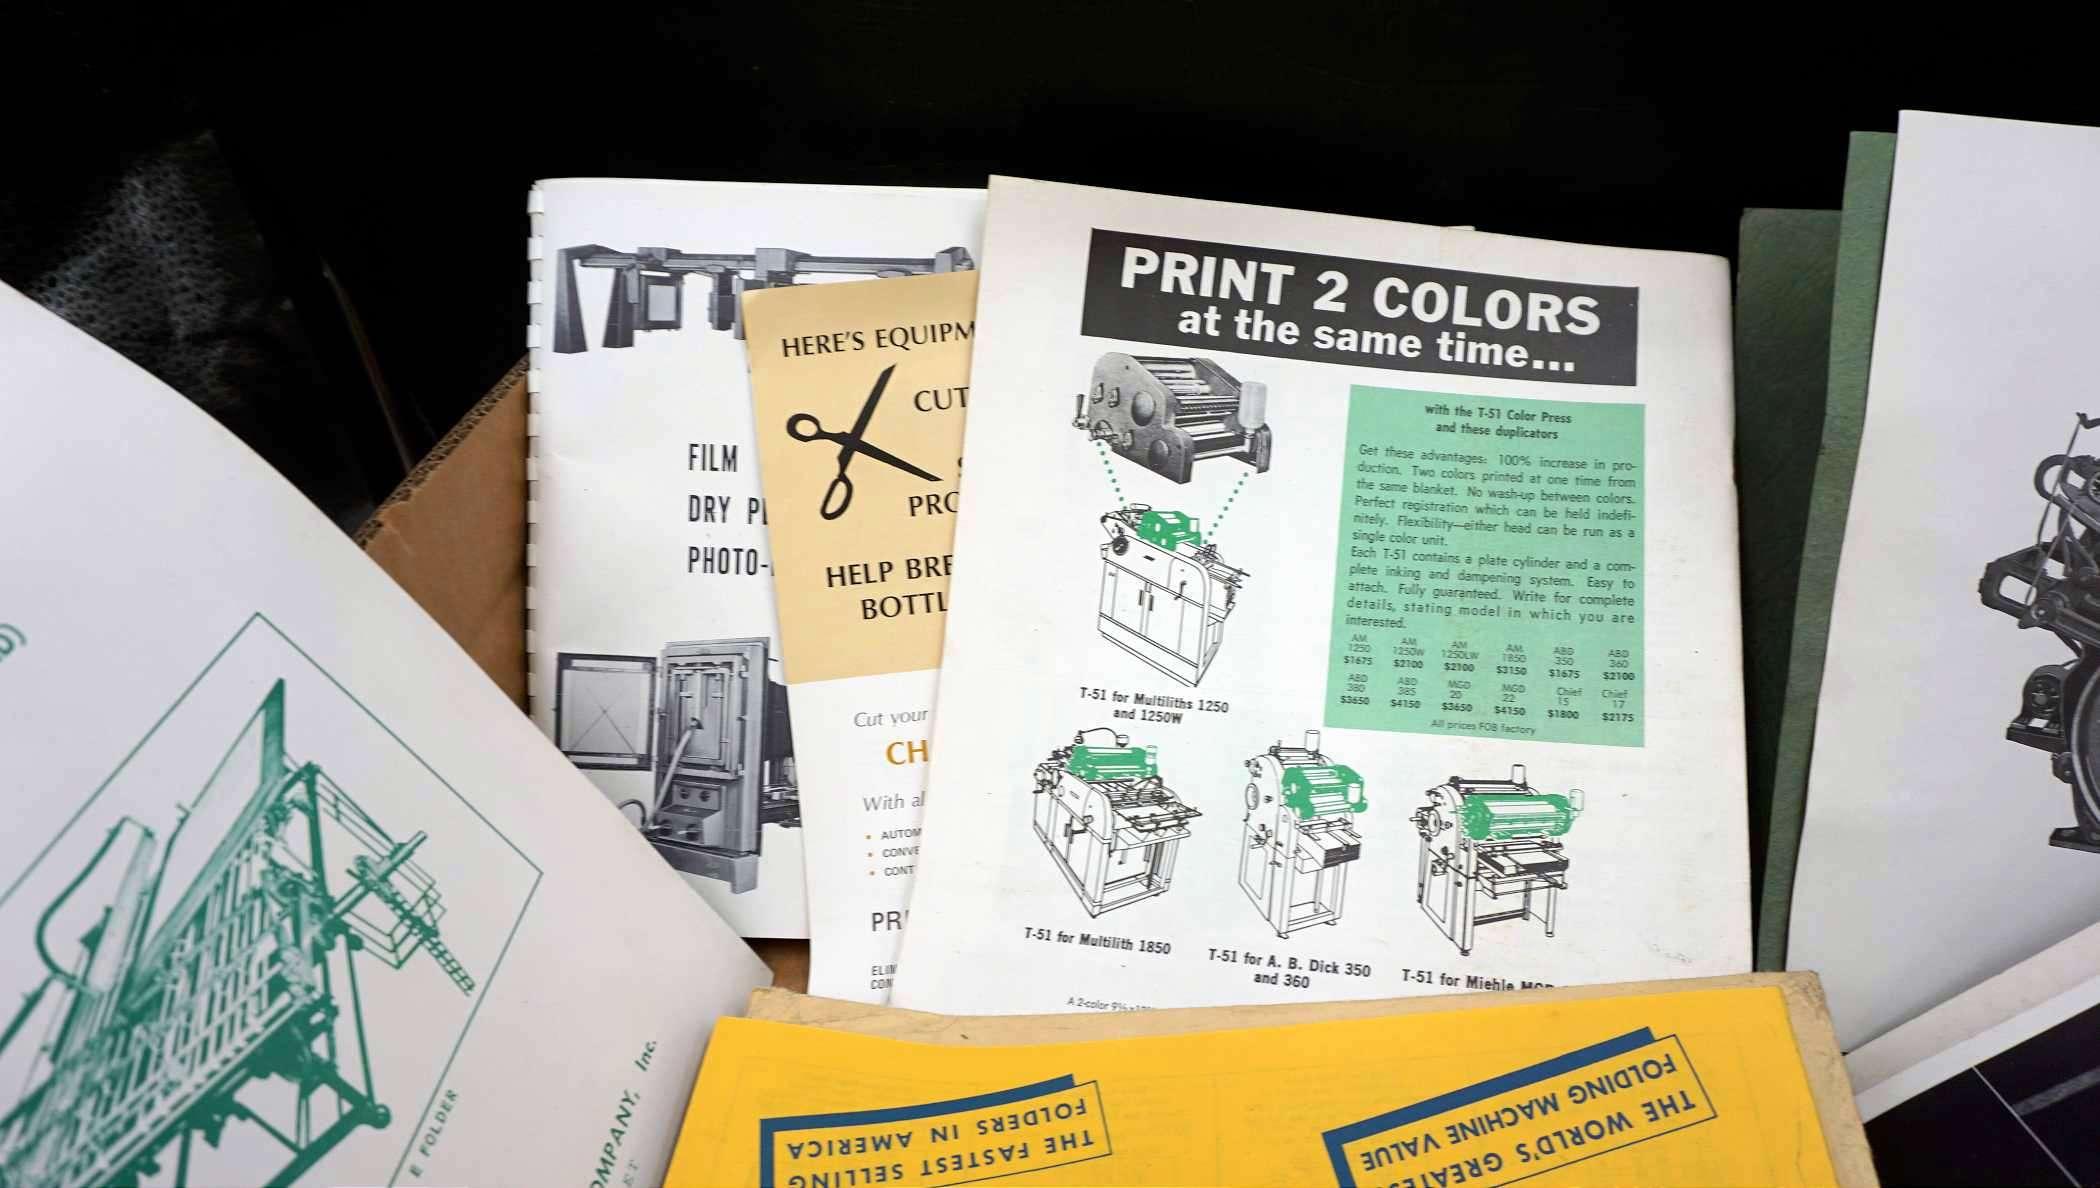 Printing Books, Pamphlets - From Old Lennox Independent Building!